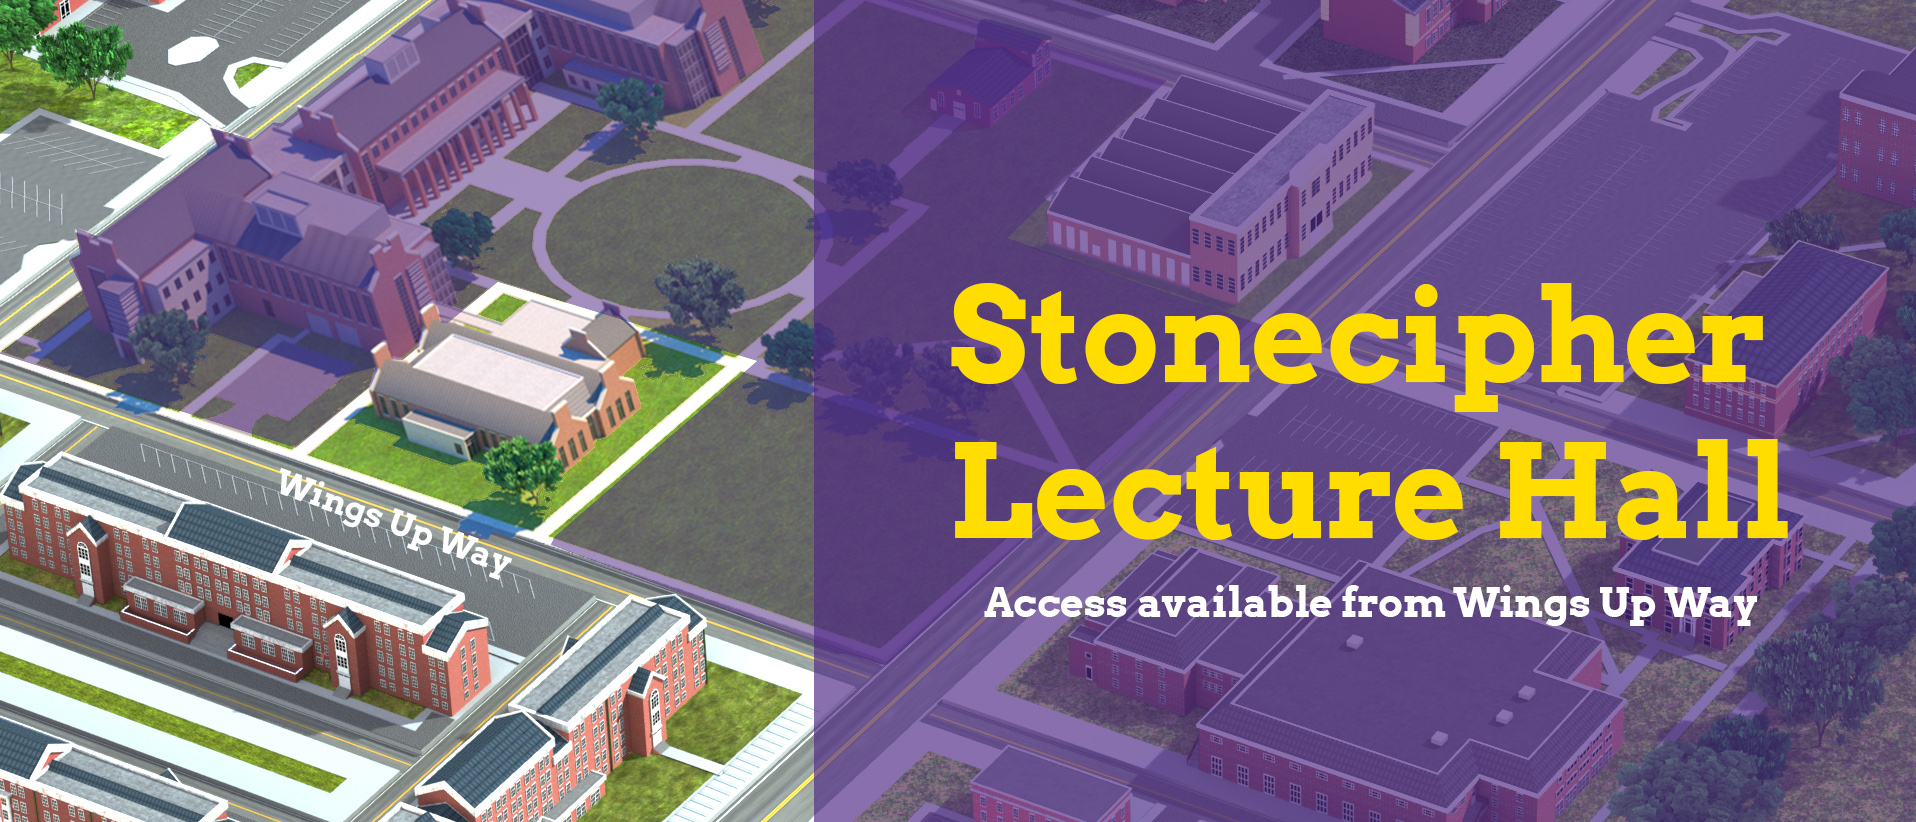 Graphic of Stonecipher Lecture Hall and it's location next to Wings Up Way